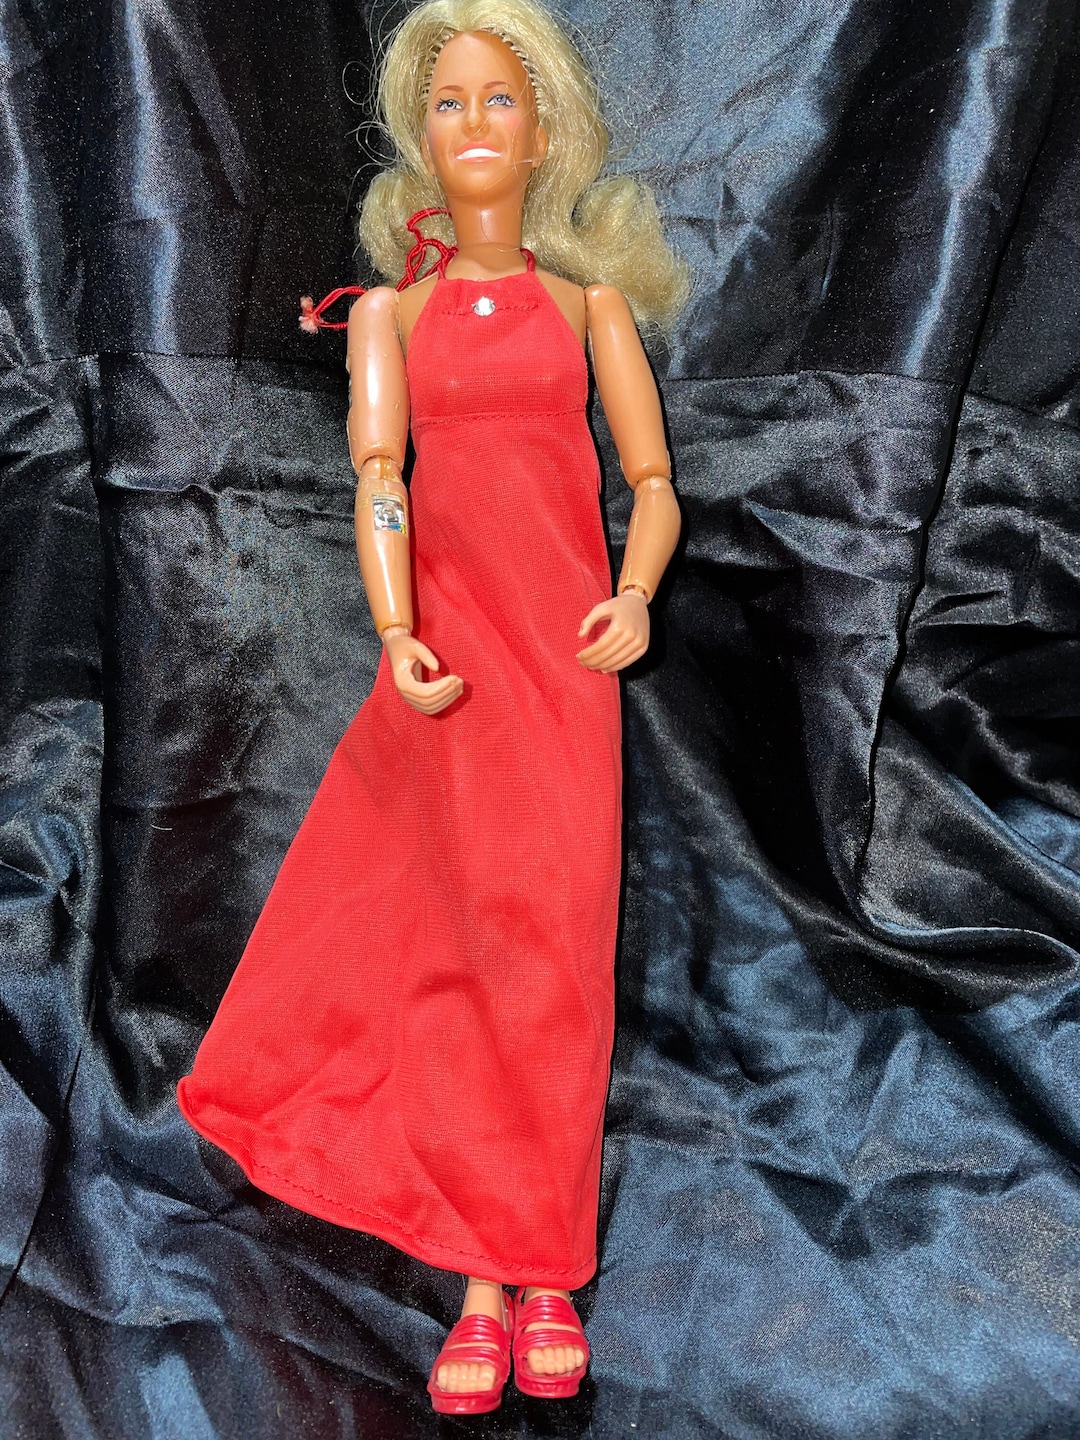 1977 Jaime Sommers Bionic Woman Barbie Doll 13 Tall Wearing Red Dress and  Red Shoes 